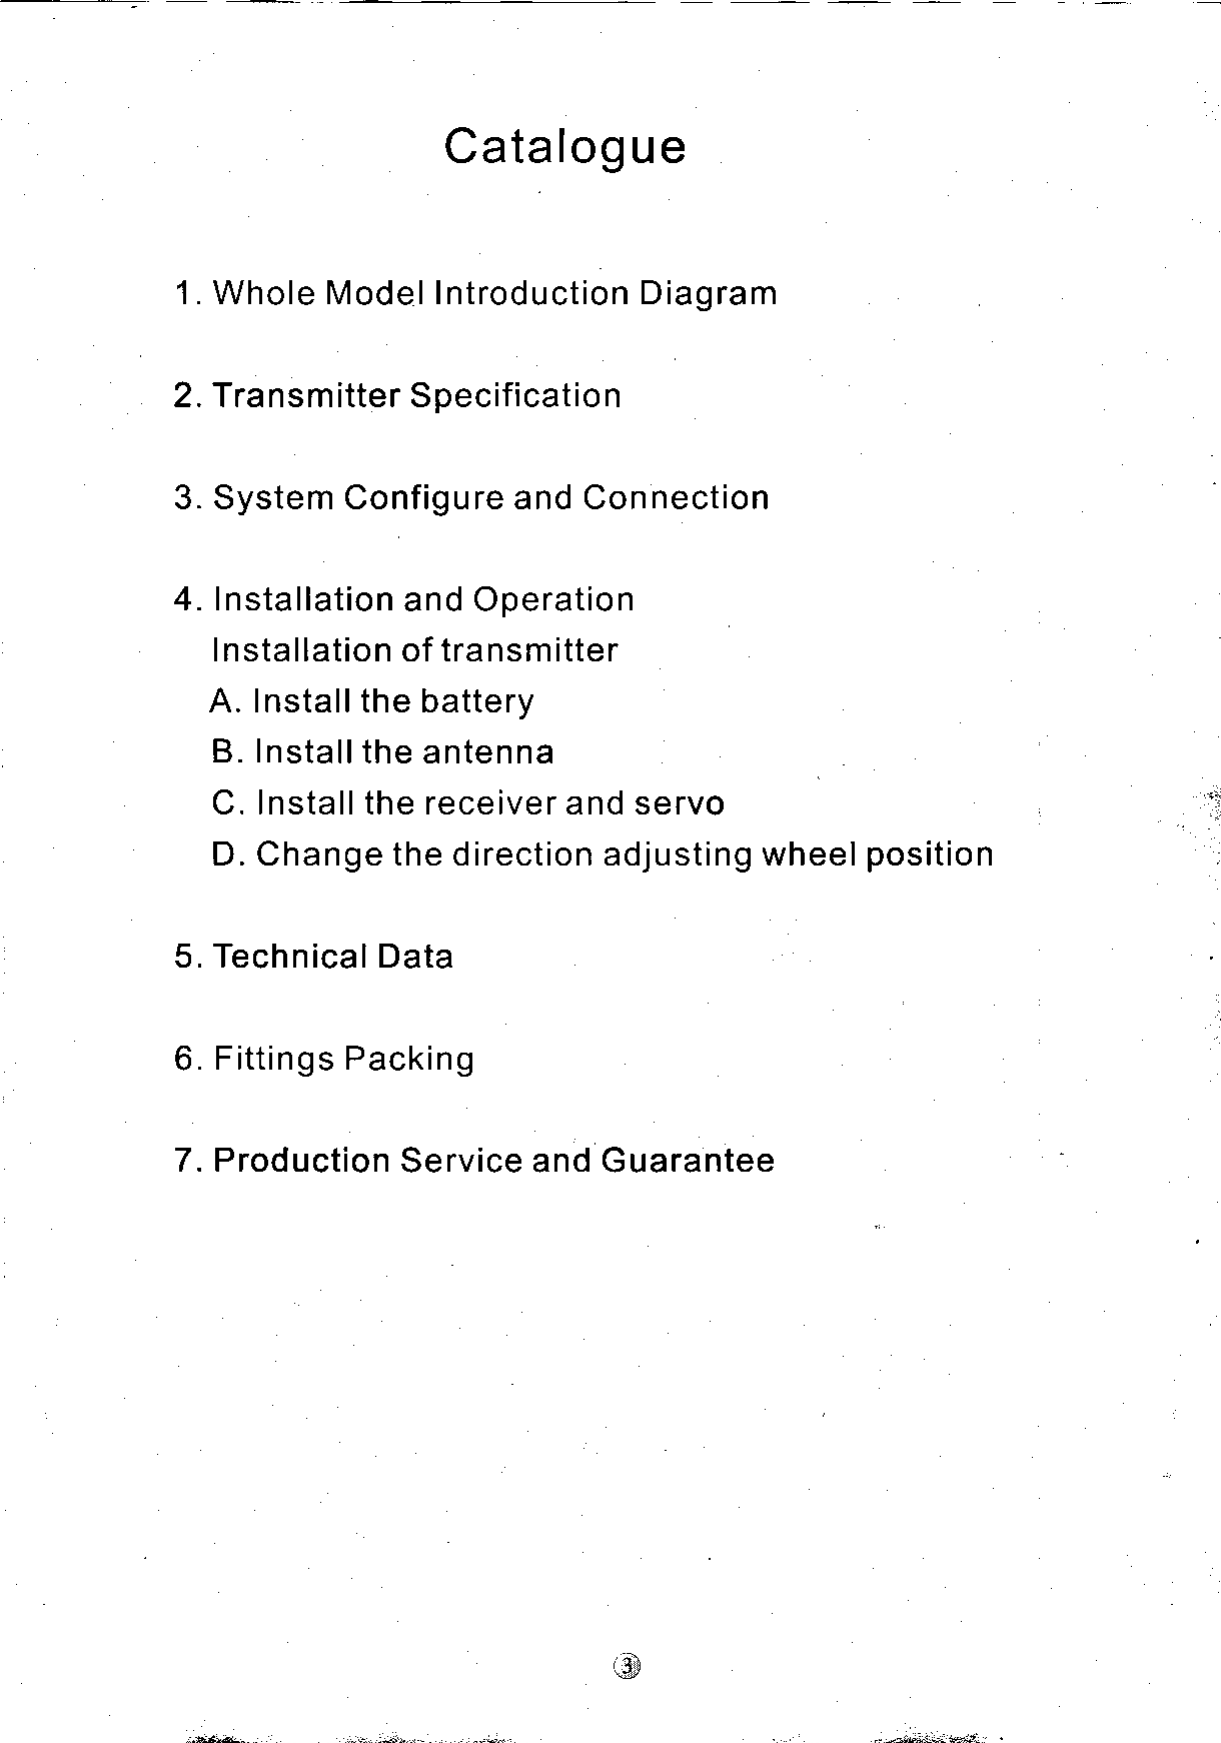 Catalogue1. Whole Model Introduction Diagram2. Transmitter Specification3. System Configure and Connection4. Installation and OperationI nstallation of transmitterA. Installthe batteryB. Installthe antennaC. Install the receiver and servoD. Change the direction adjusting wheel position5. Technical Data6. Fittings Packing7. Production Service and Guarantee-t